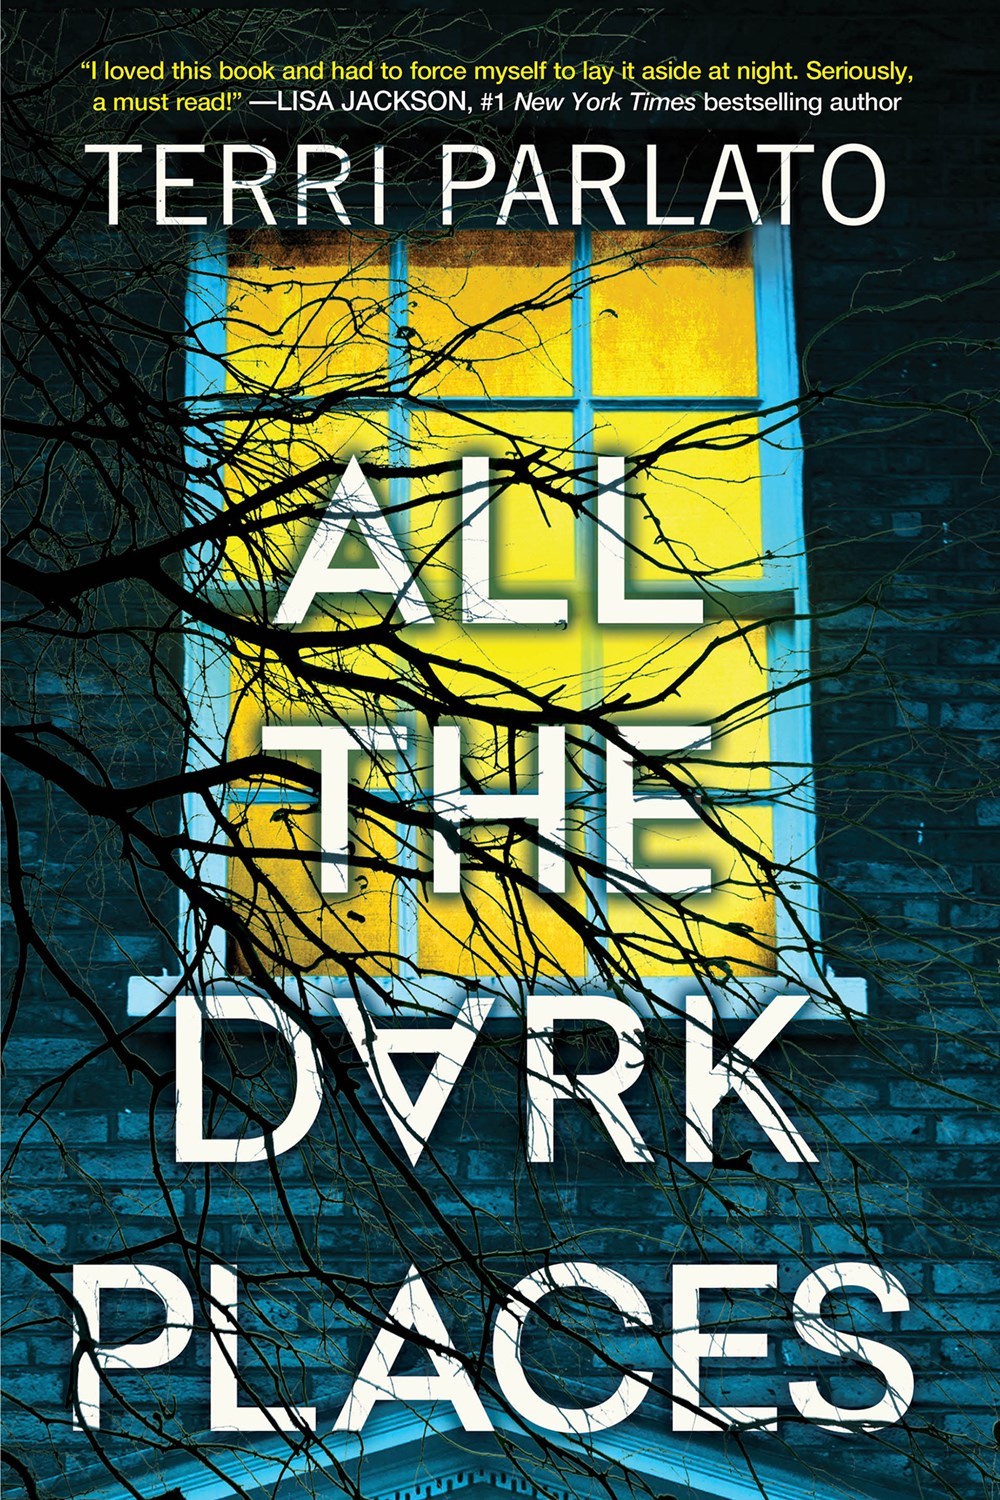 Image of "All the Dark Places"